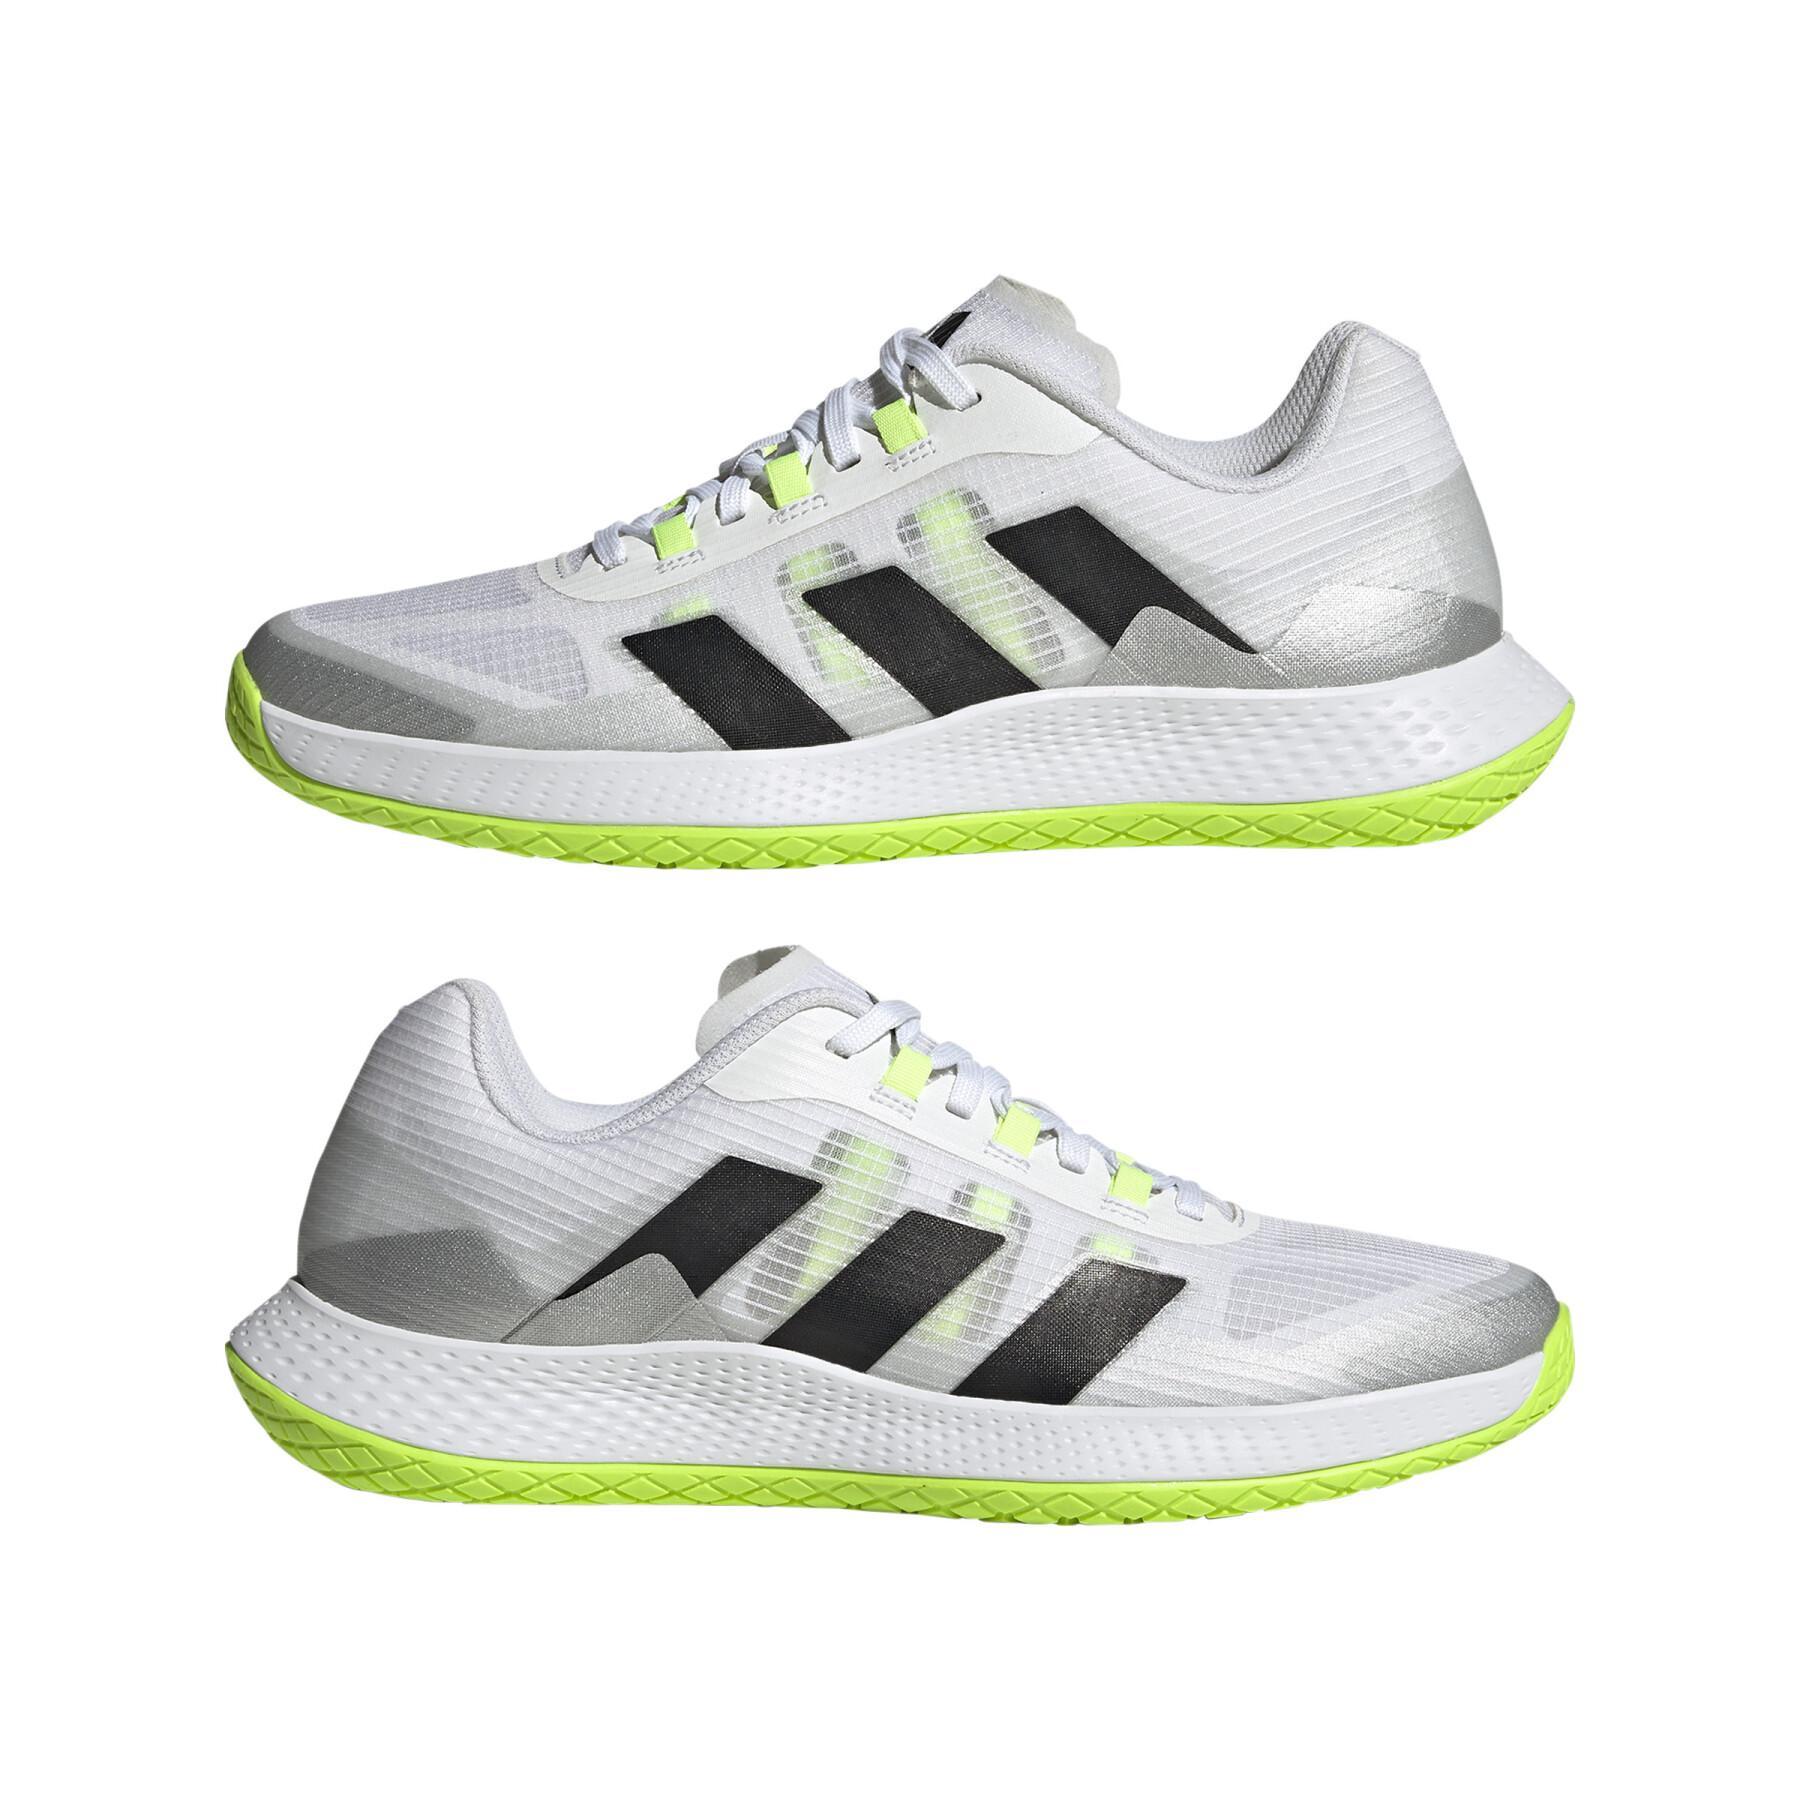 Chaussures indoor enfant adidas Forcebounce 2.0